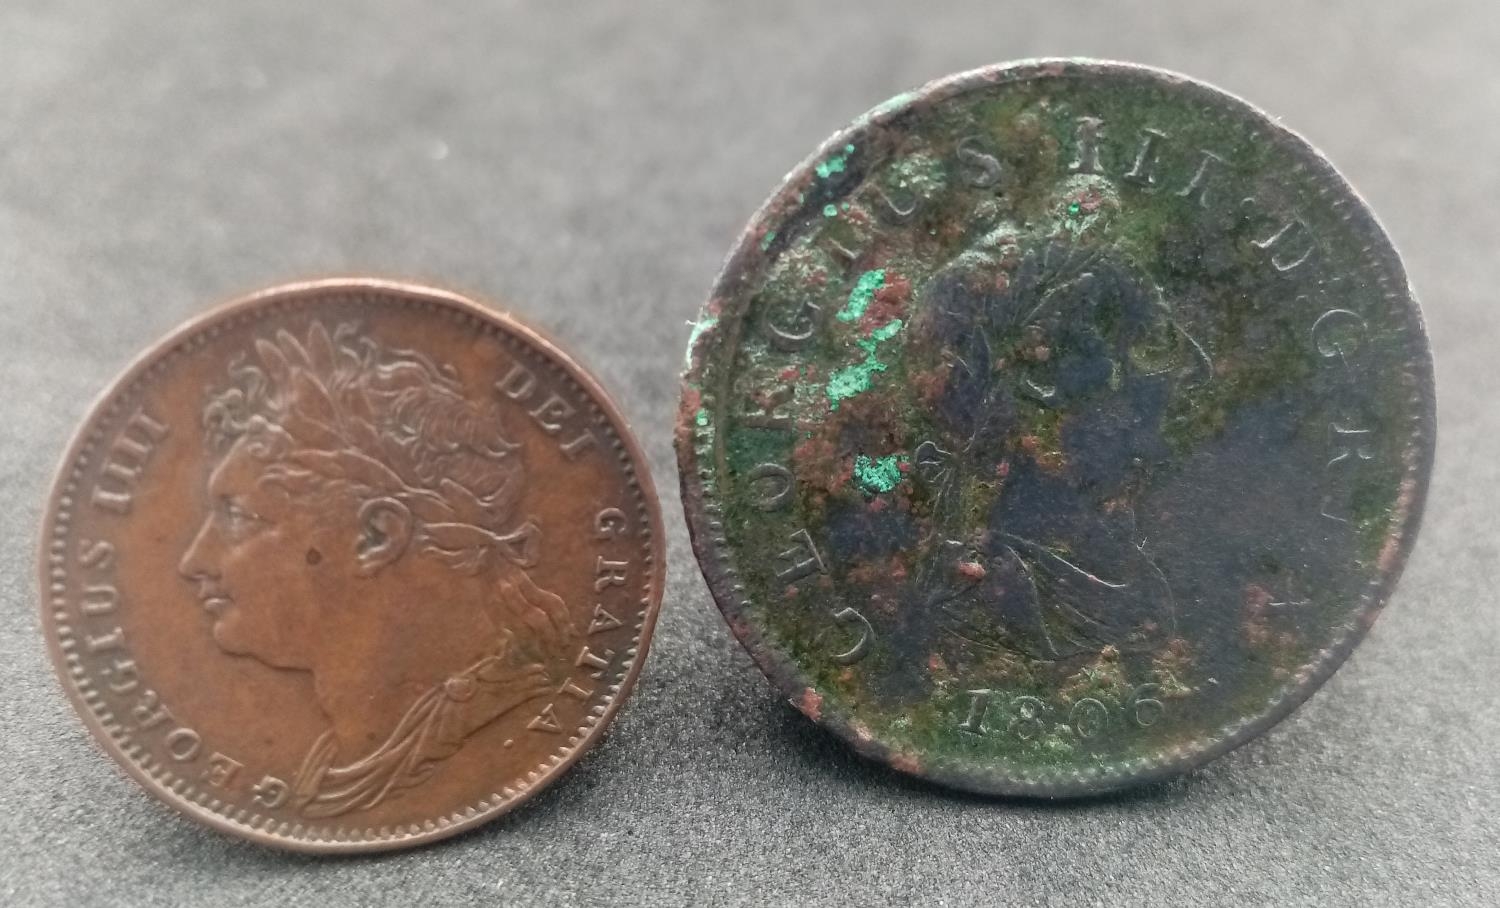 An 1821 George III Farthing and an 1806 Half Penny. - Image 2 of 3